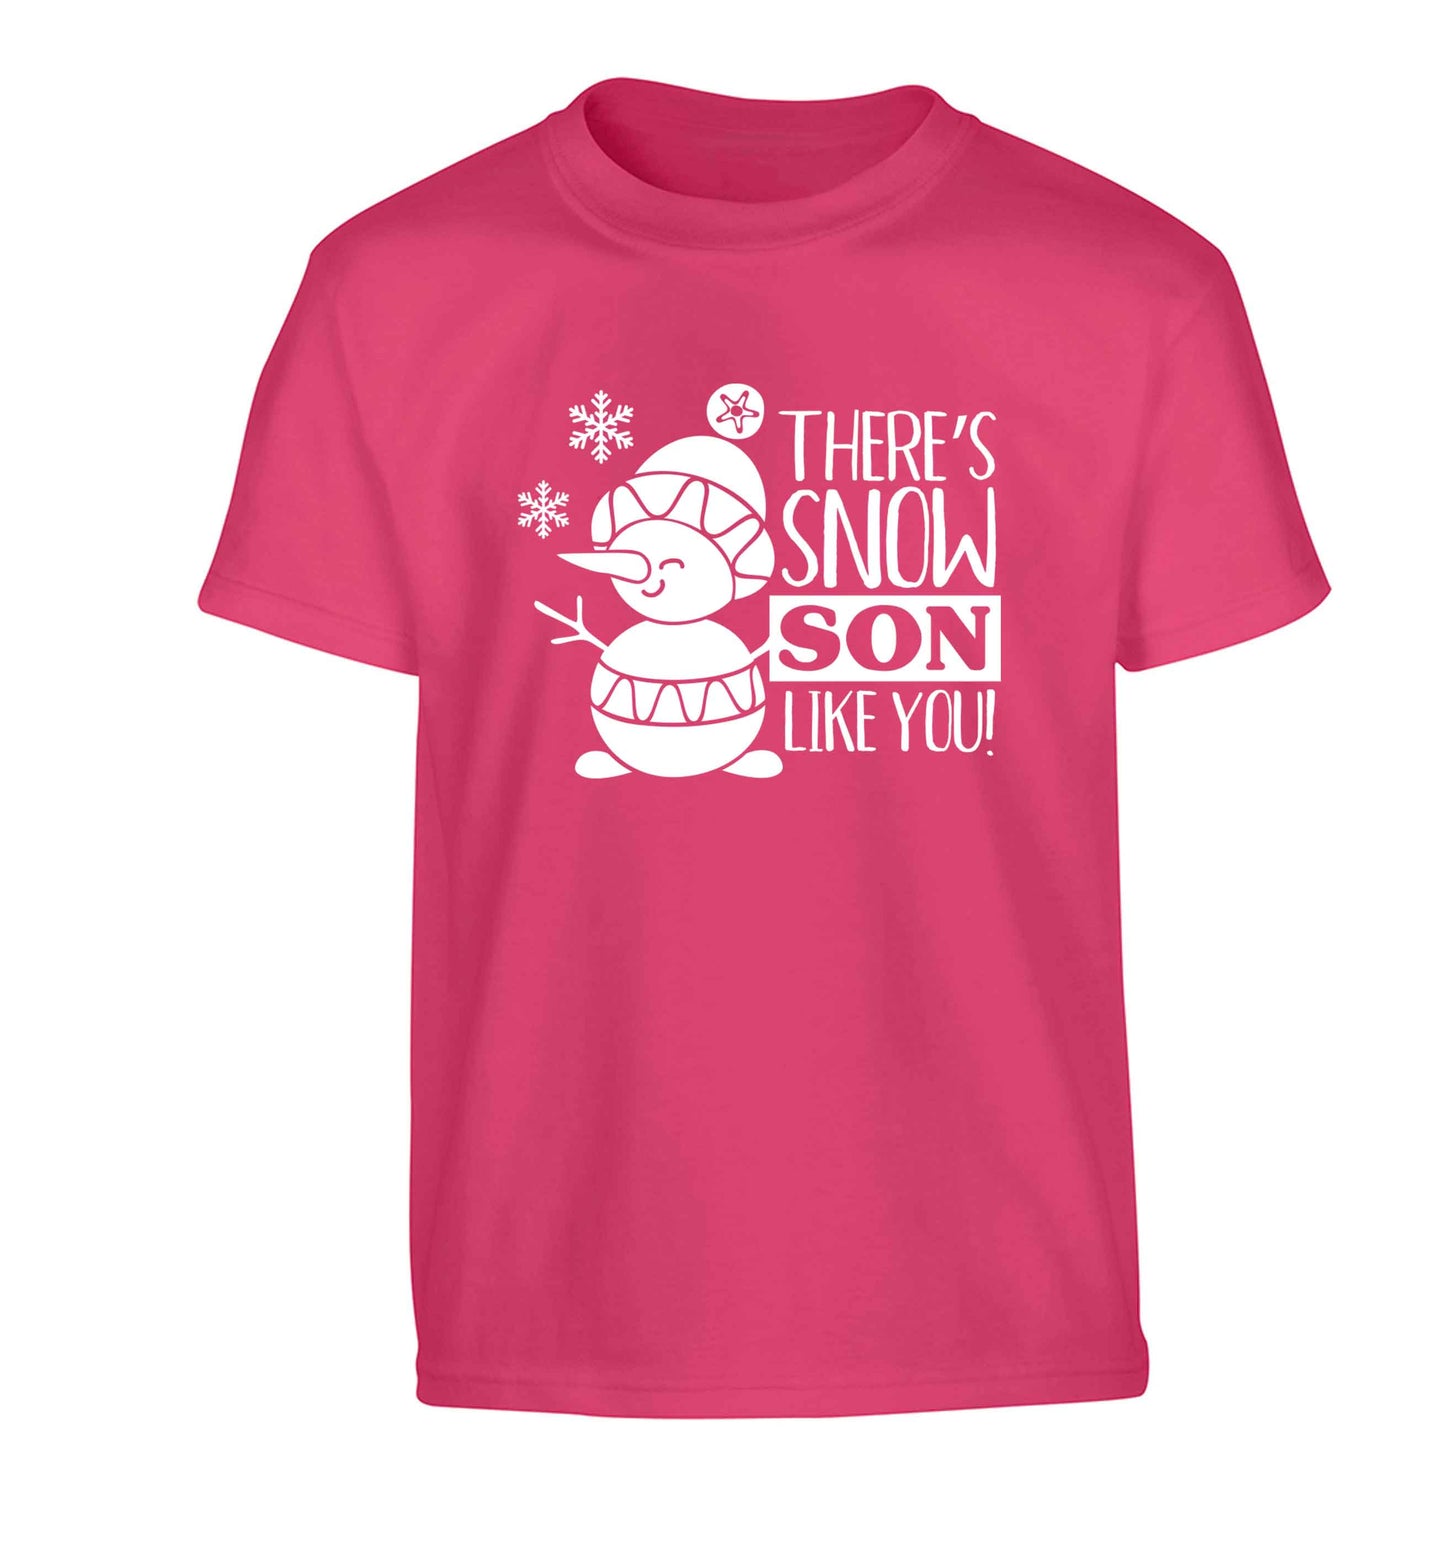 There's snow son like you Children's pink Tshirt 12-13 Years